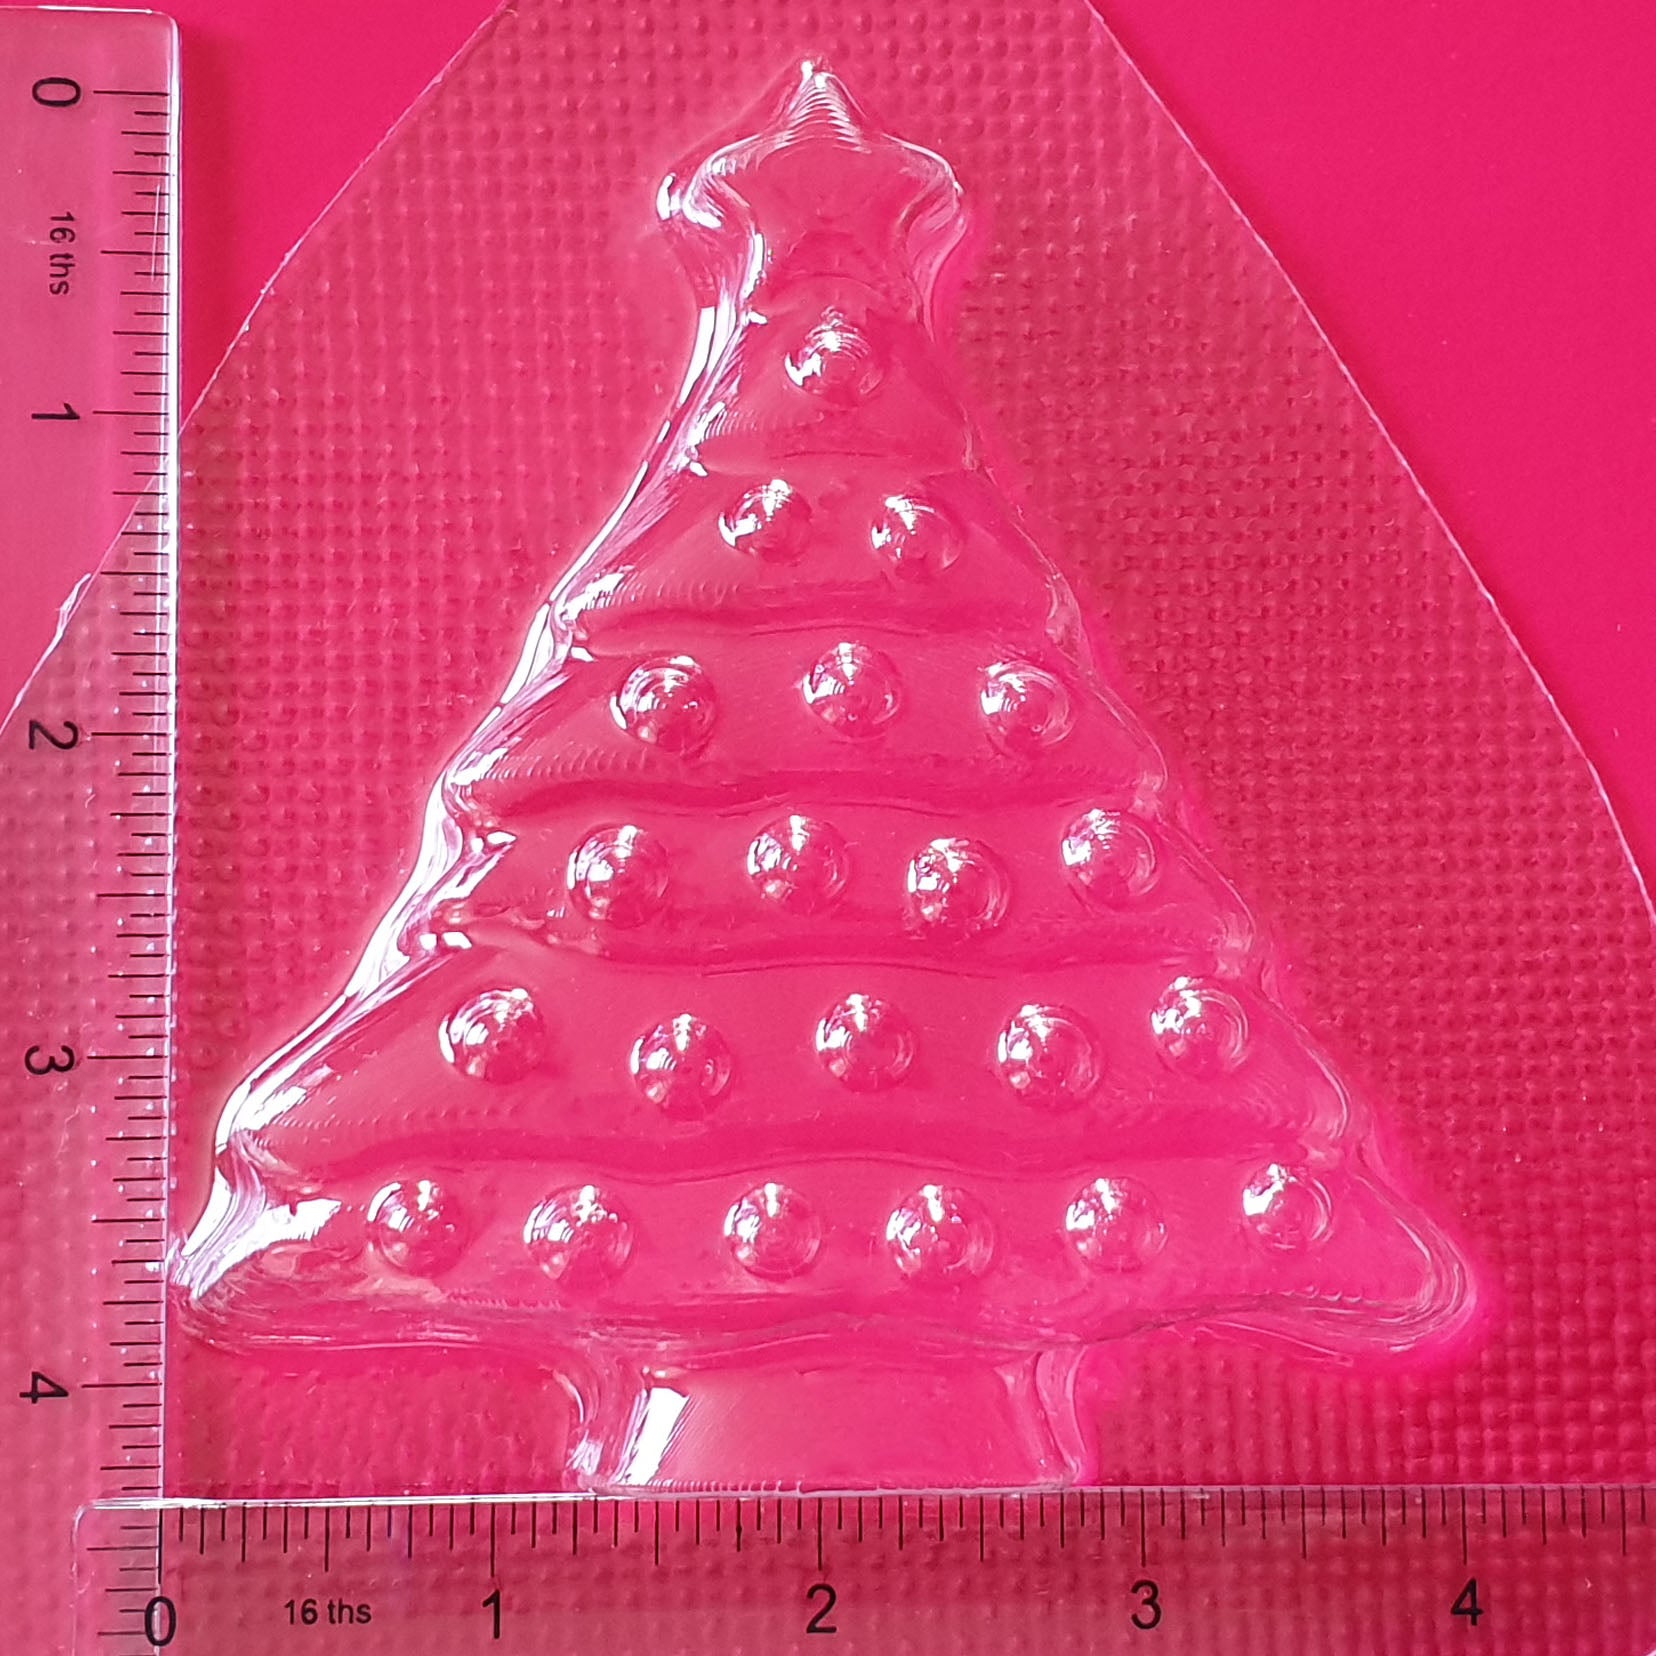 Christmas Tree Mould | Truly Personal | Bath Bomb, Soap, Resin, Chocolate, Jelly, Wax Melts MoldChristmas Tree Mould | Truly Personal | Bath Bomb, Soap, Resin, Chocolate, Jelly, Wax Melts Mold